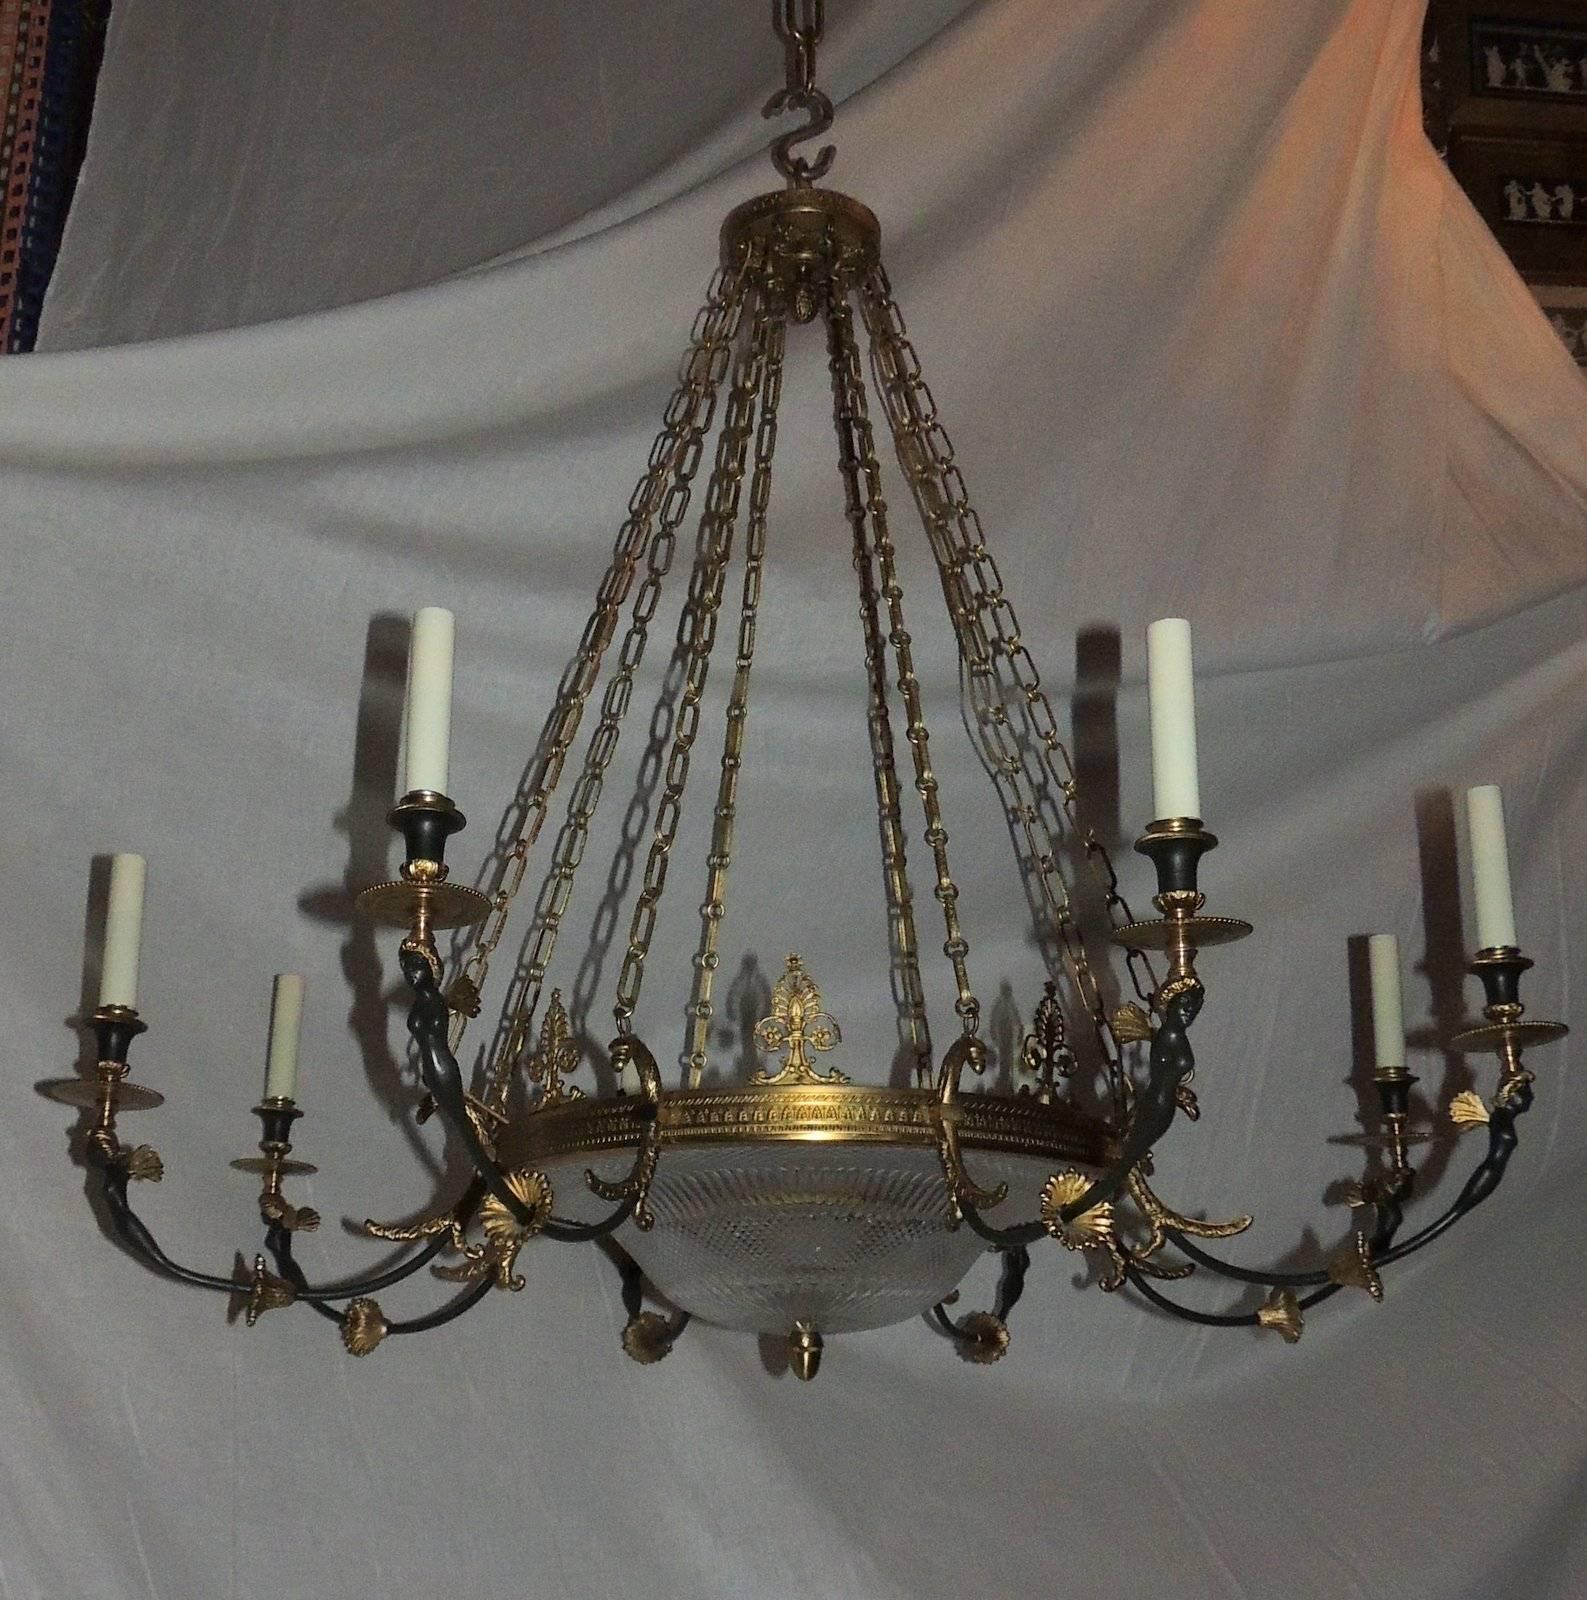 A wonderful French doré and patina bronze cut crystal figural Empire neoclassical large chandelier. Measures: 36